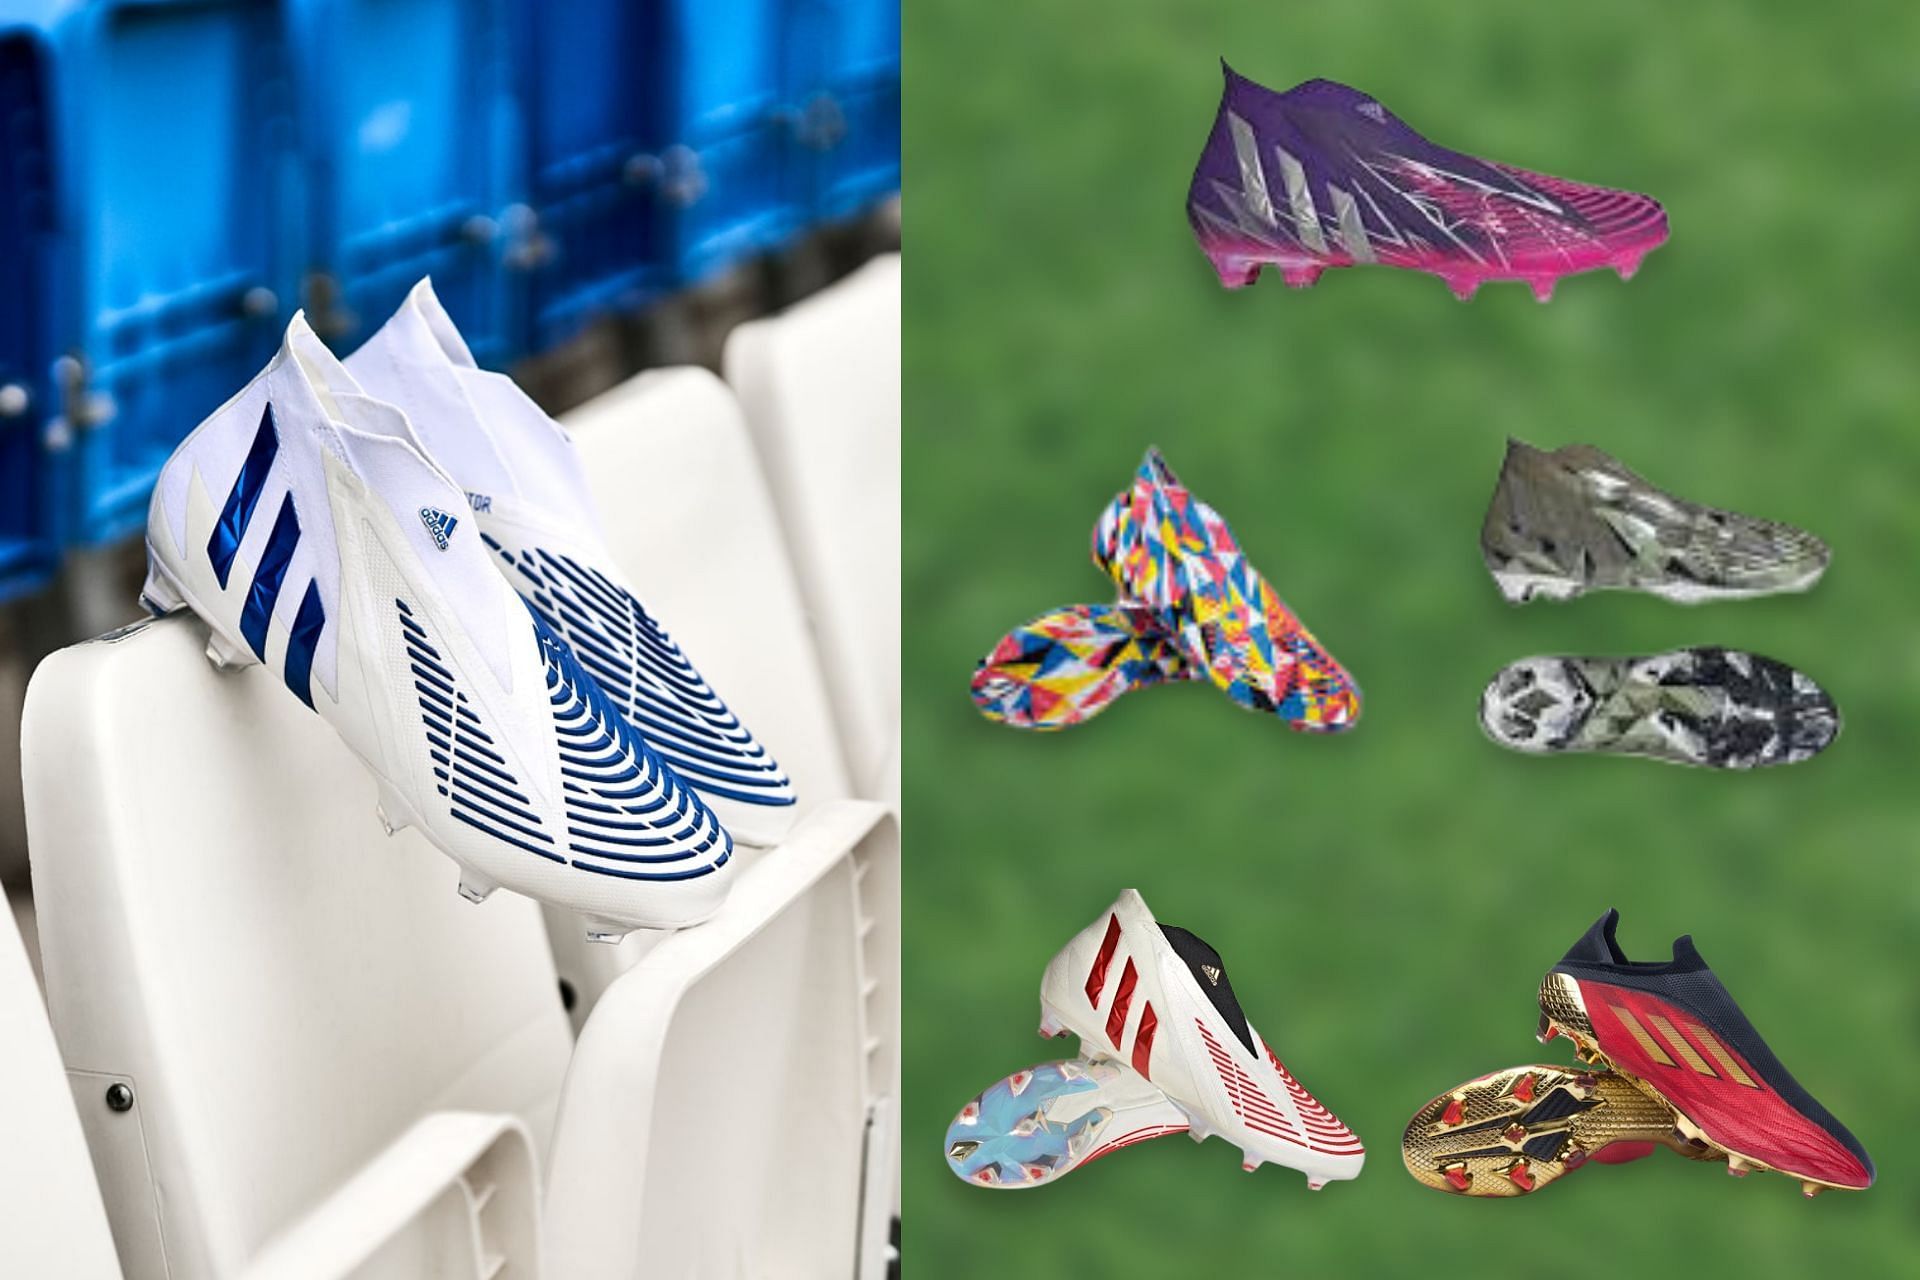 Here Are Our Top 5 Adidas Predator Mania Boots - Footy Headlines